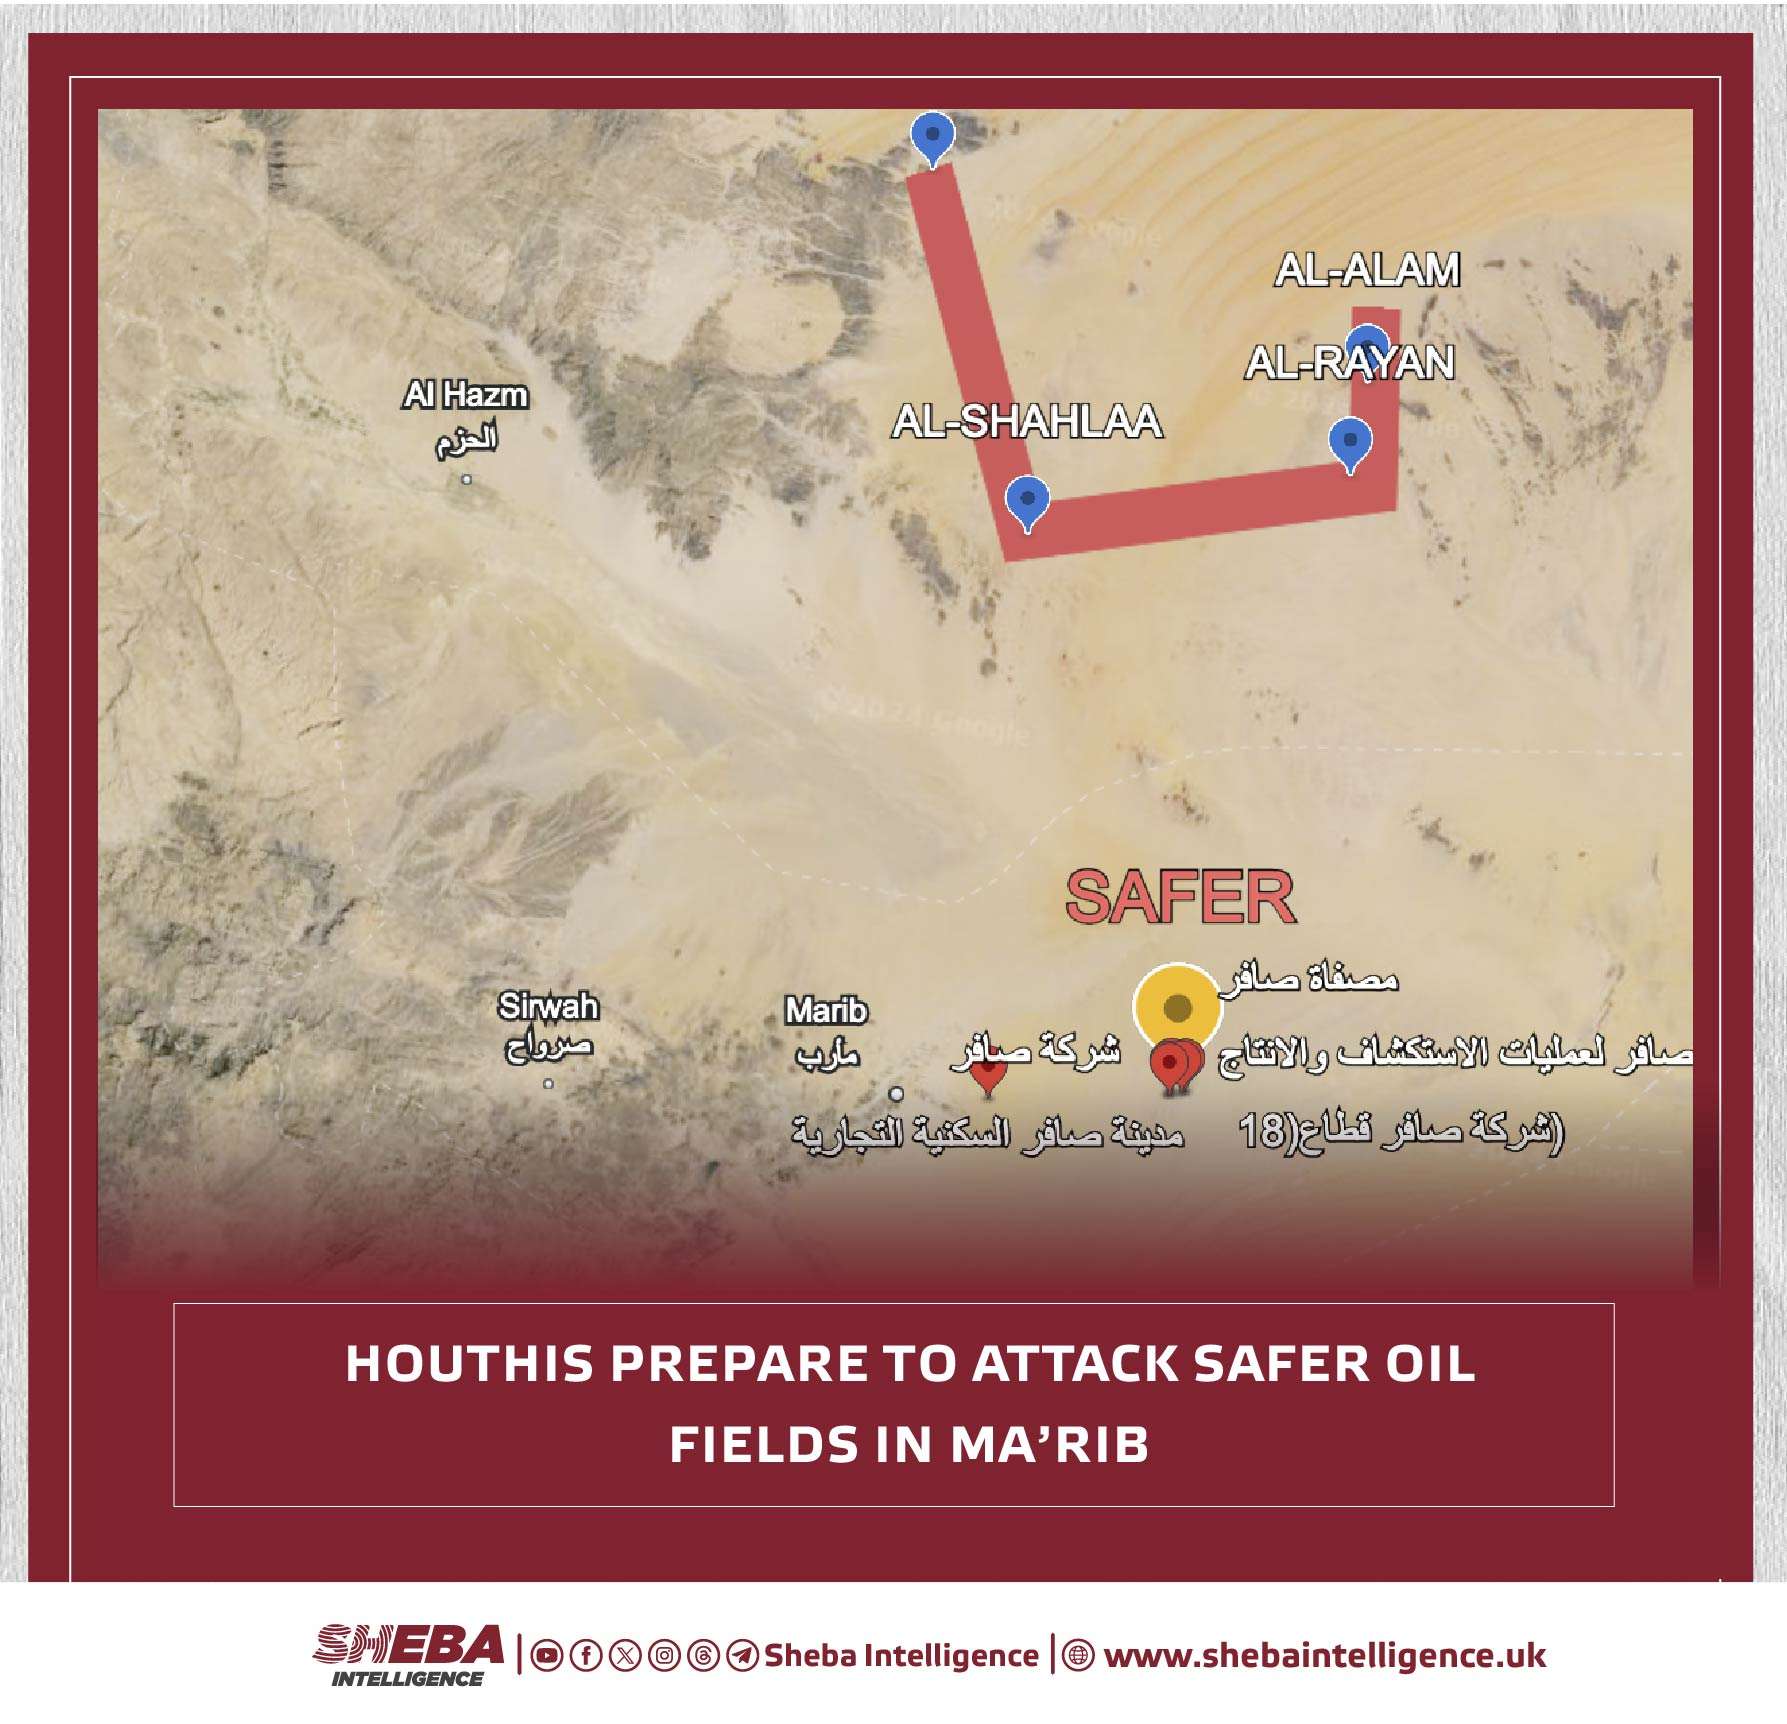 Houthis Prepare to Attack Safer Oil Fields in Ma’rib